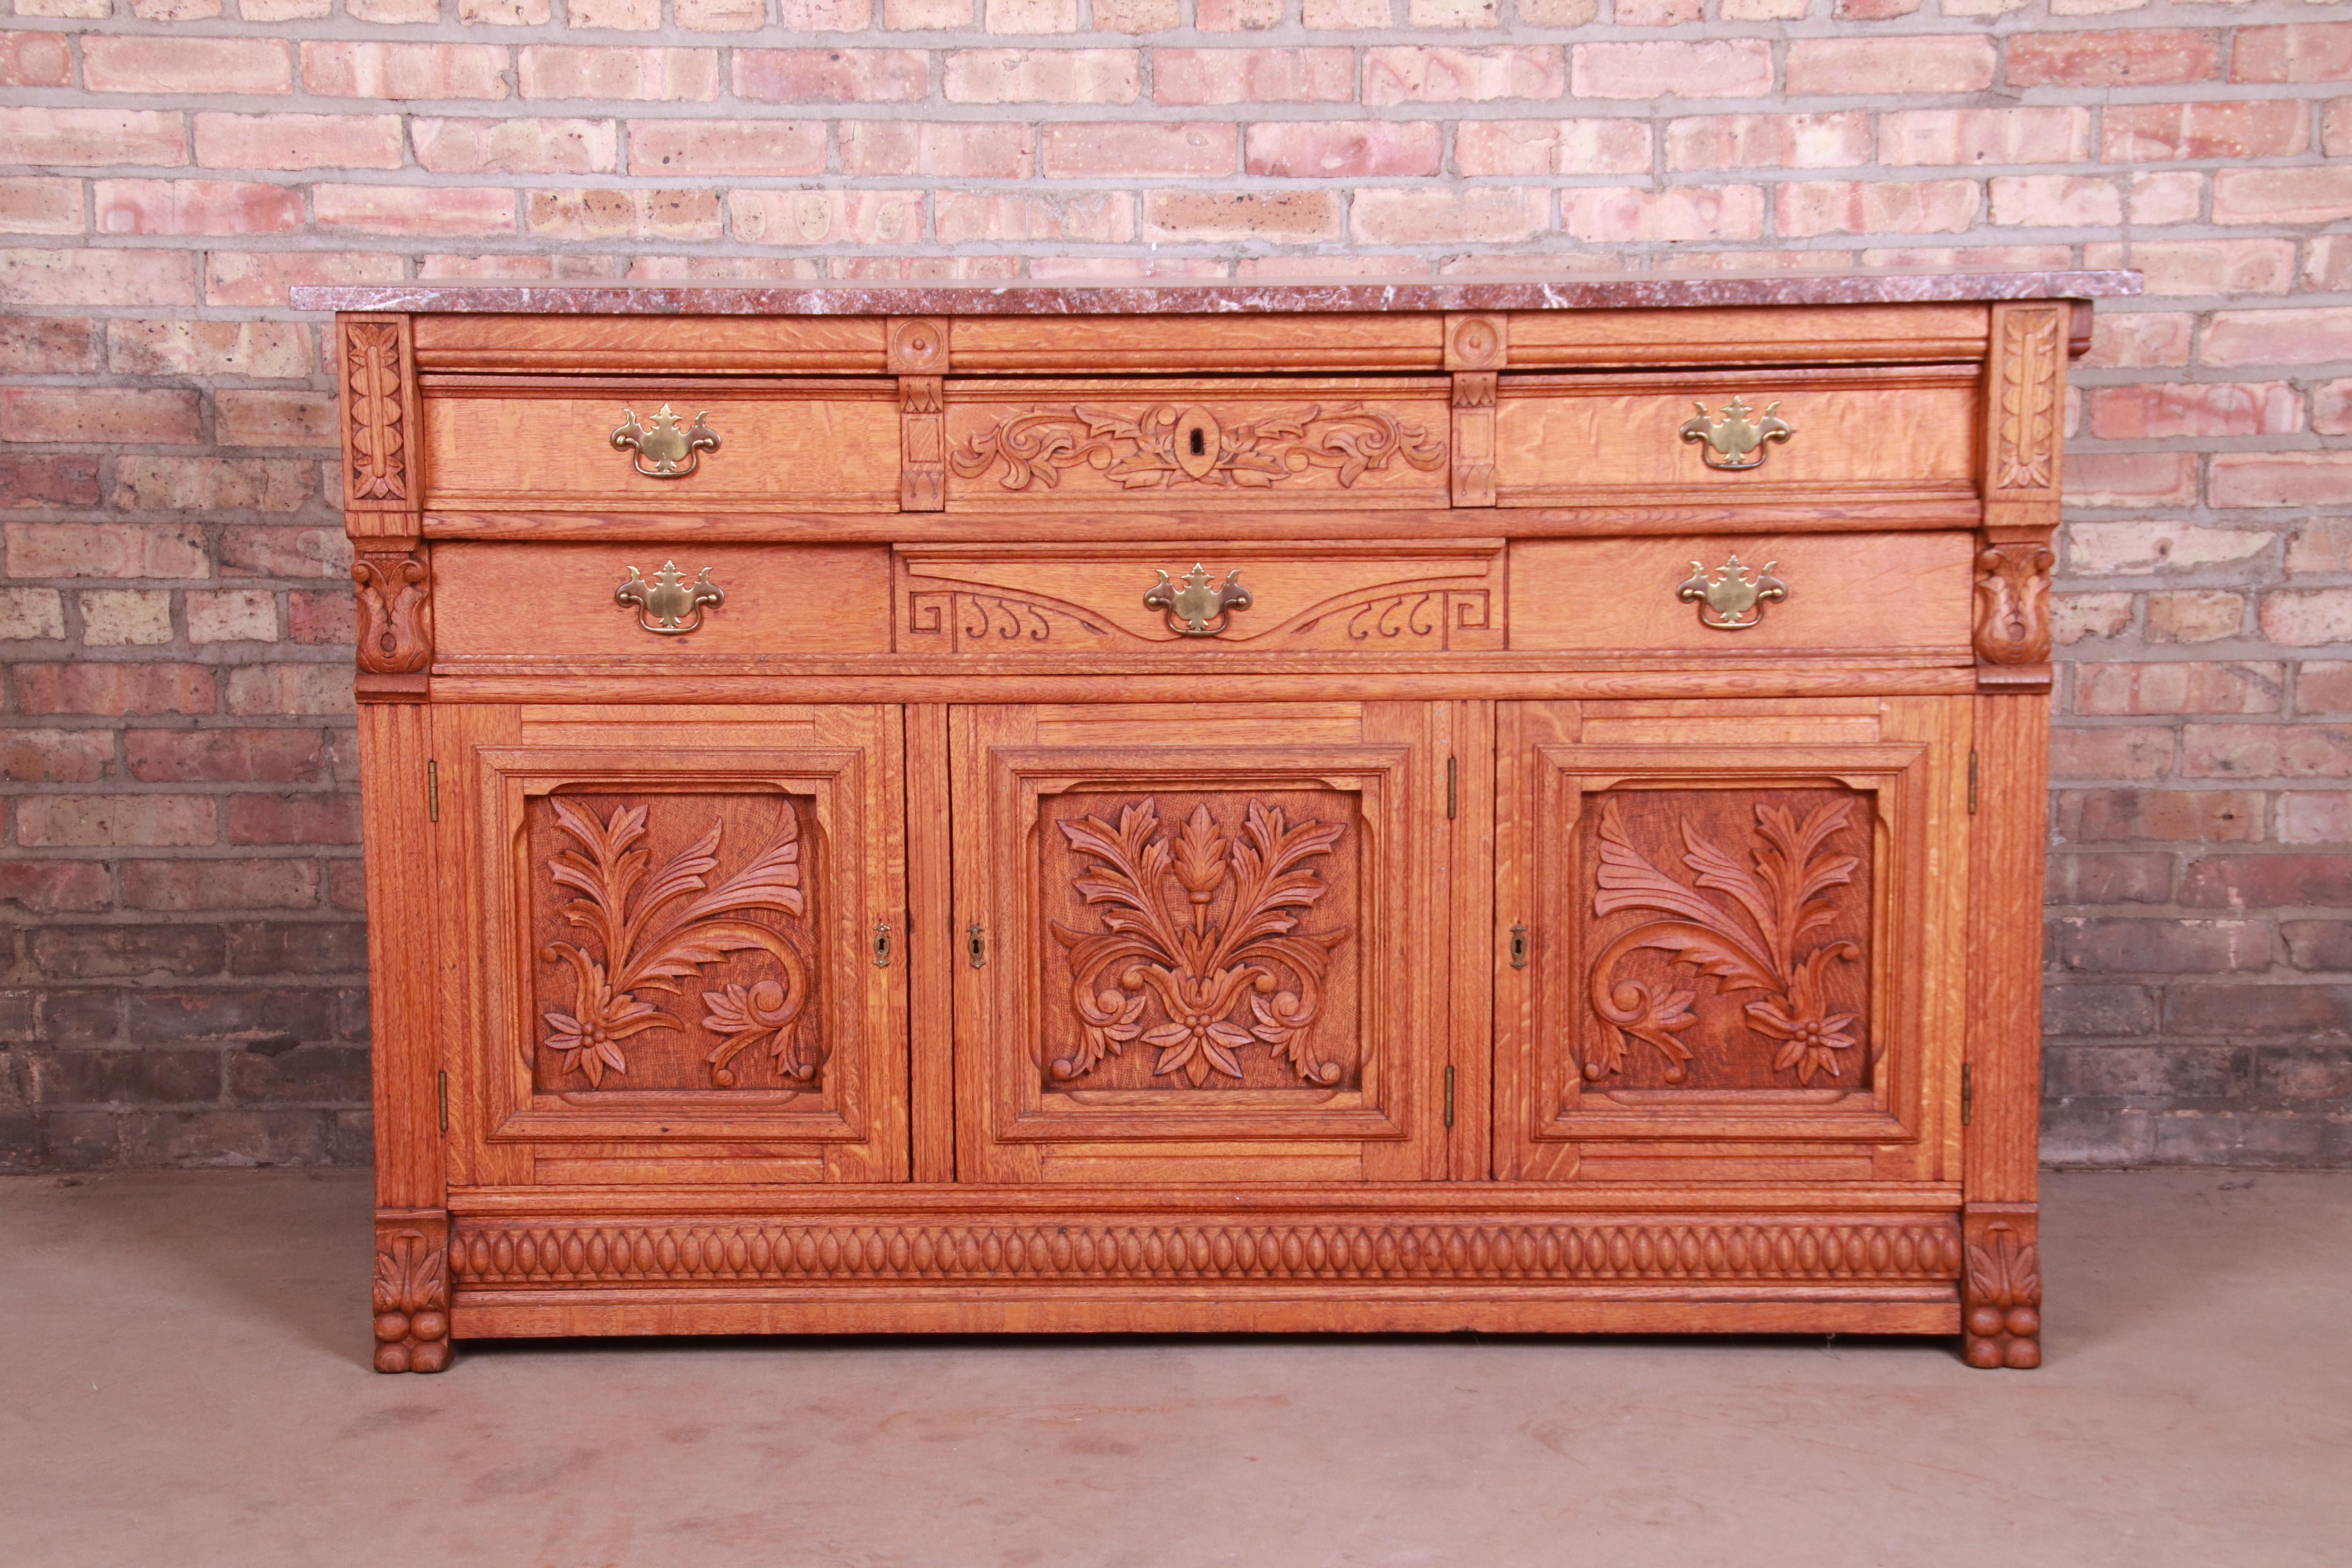 An exceptional antique ornate carved sideboard, credenza, or bar cabinet

Attributed to R.J. Horner & Co.

USA, circa 1890s

Carved solid oak, with brass hardware and marble top.

Measures: 60.25